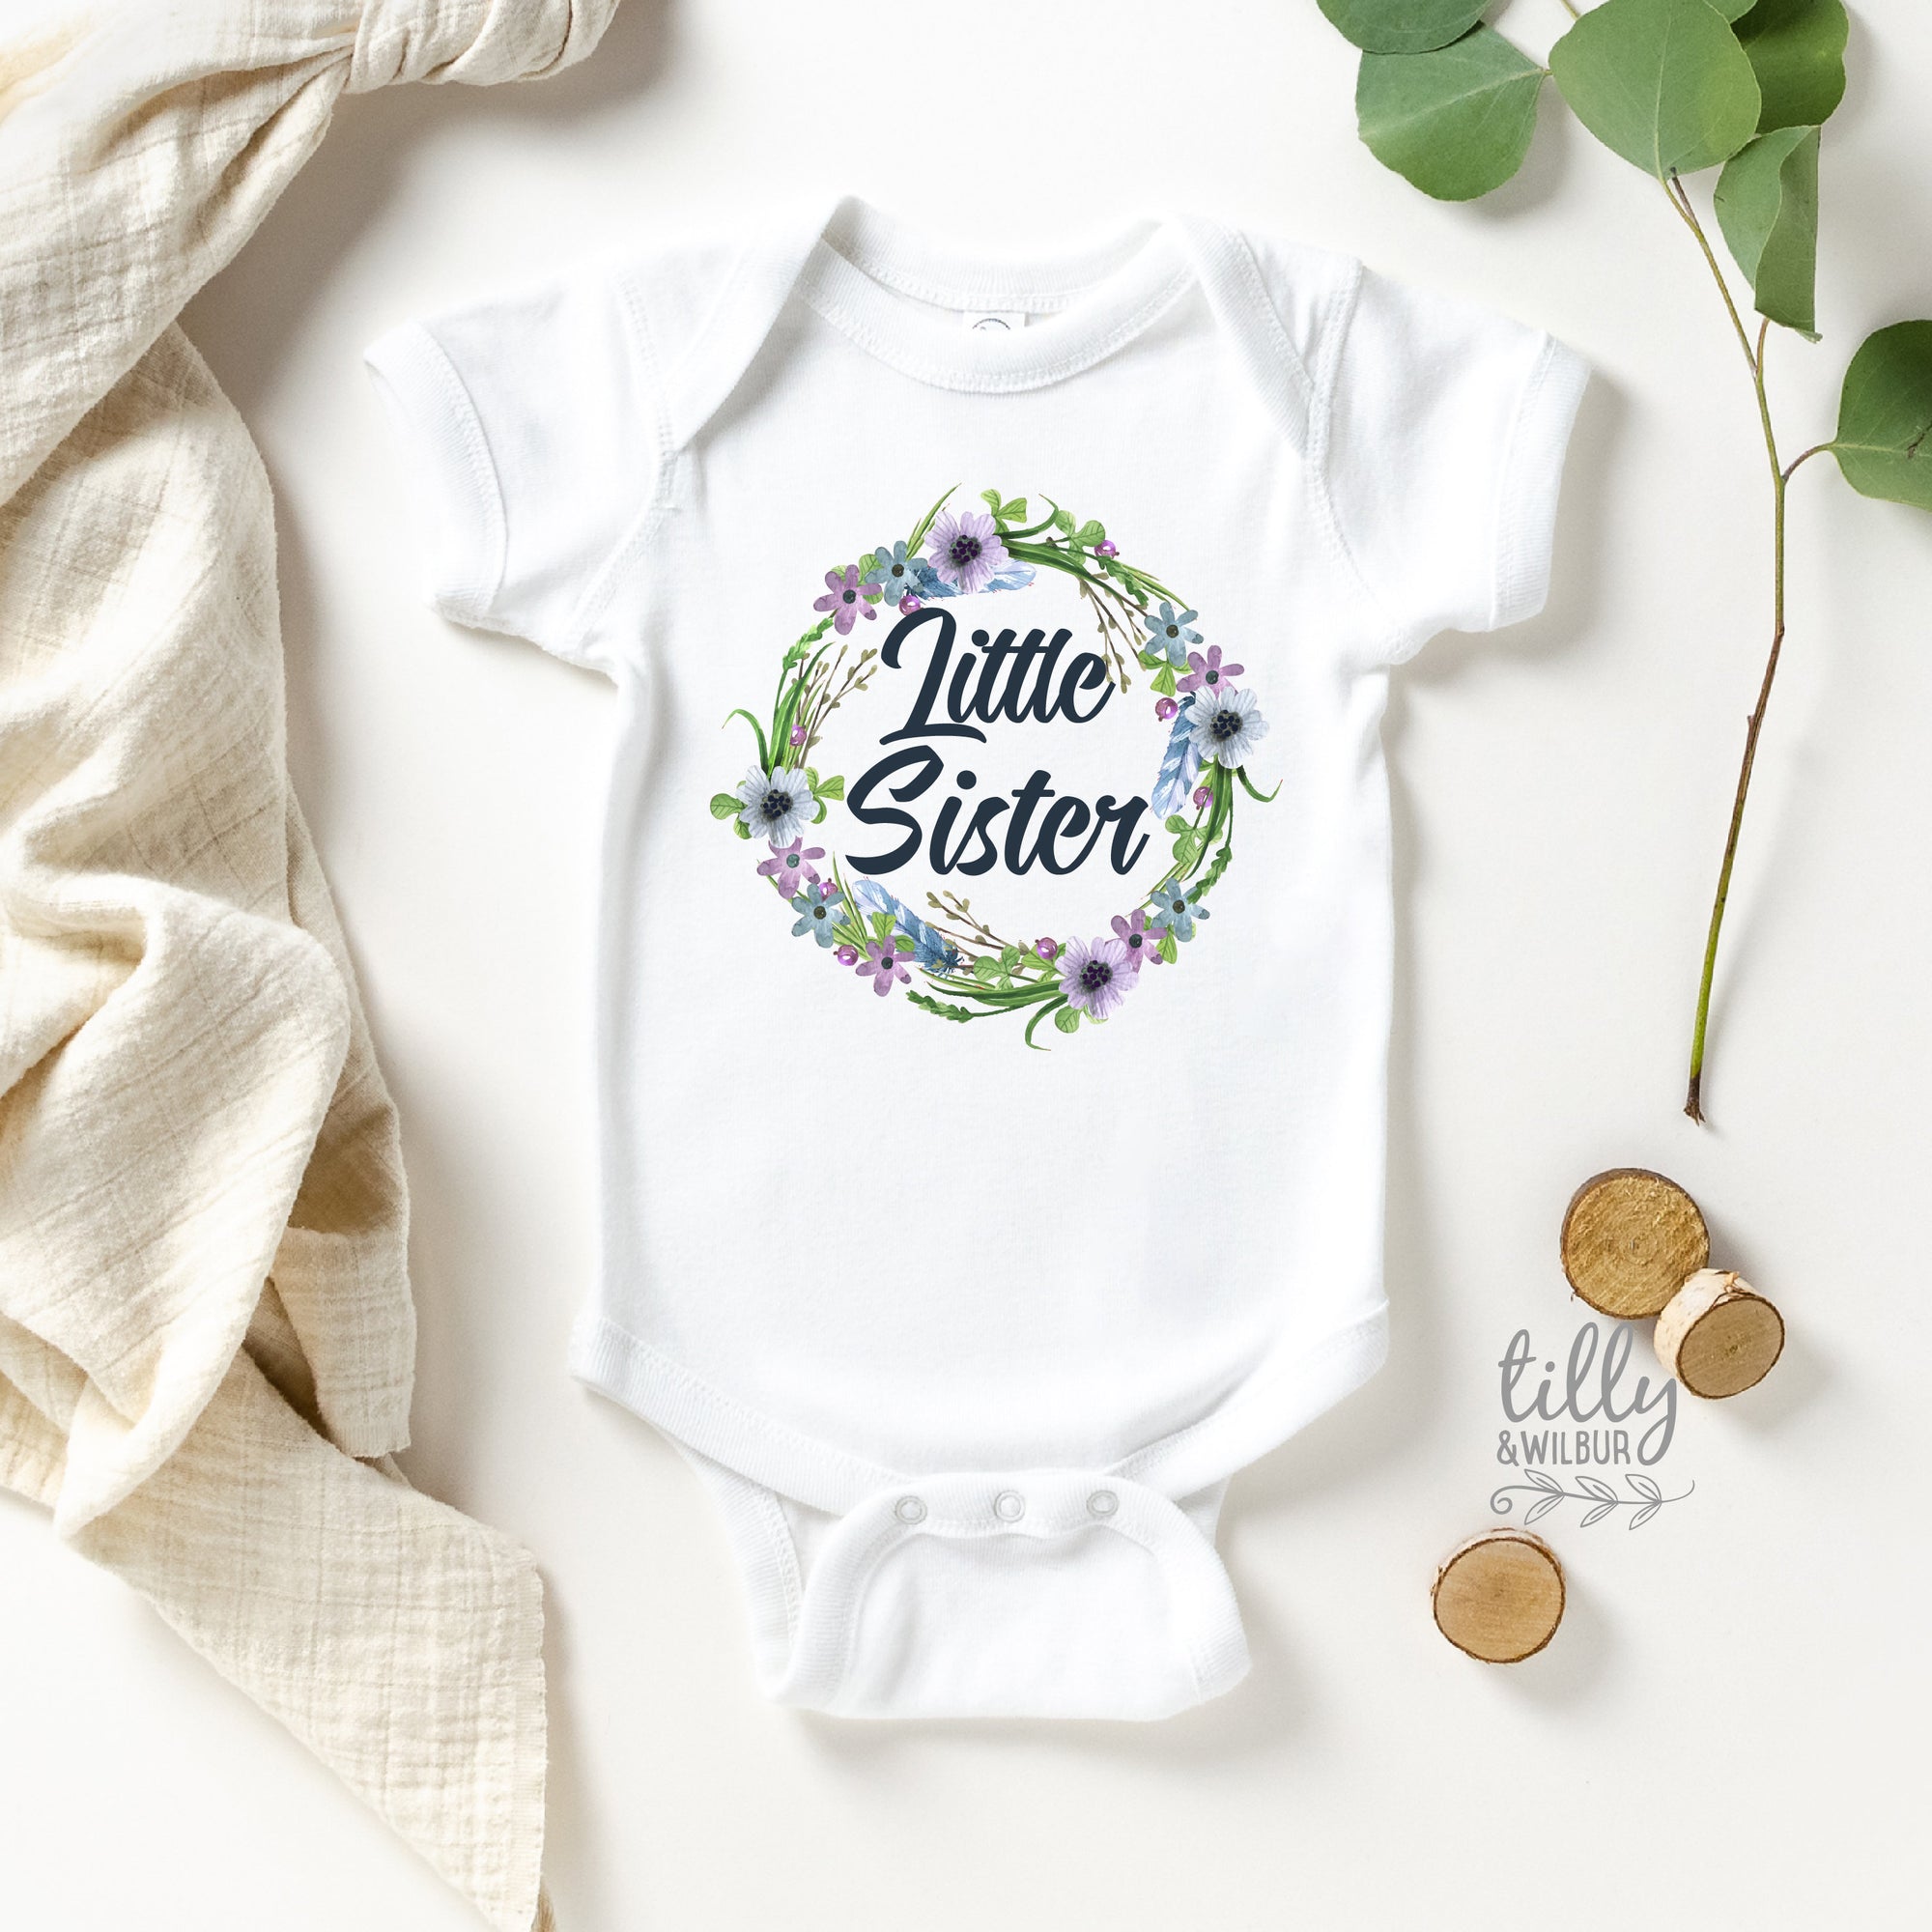 Little Sister Bodysuit To Add To Matching Big Sister T-Shirt With Floral Design, Sister Brother Outfit, Little Sis, Little Sister Bodysuit